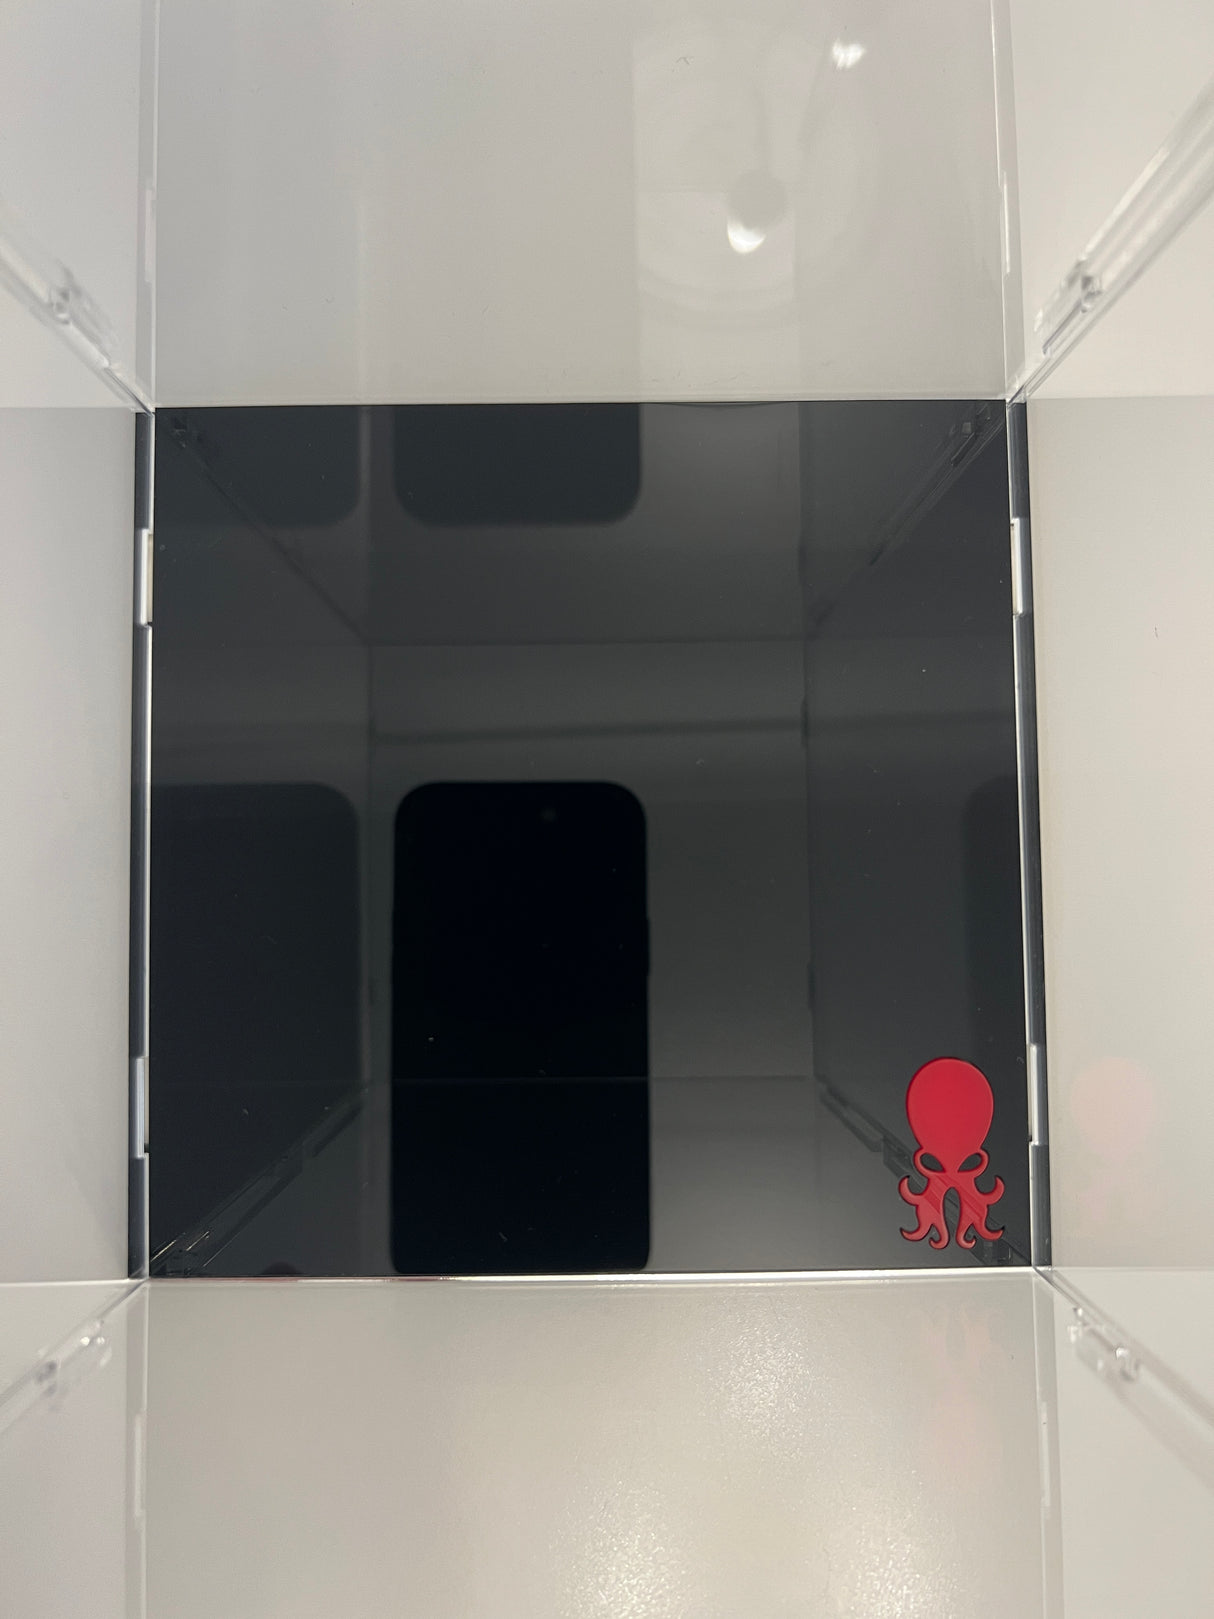 Octocase: Six Inch: Midi: Action Figure Display Case-Planet Action Figures